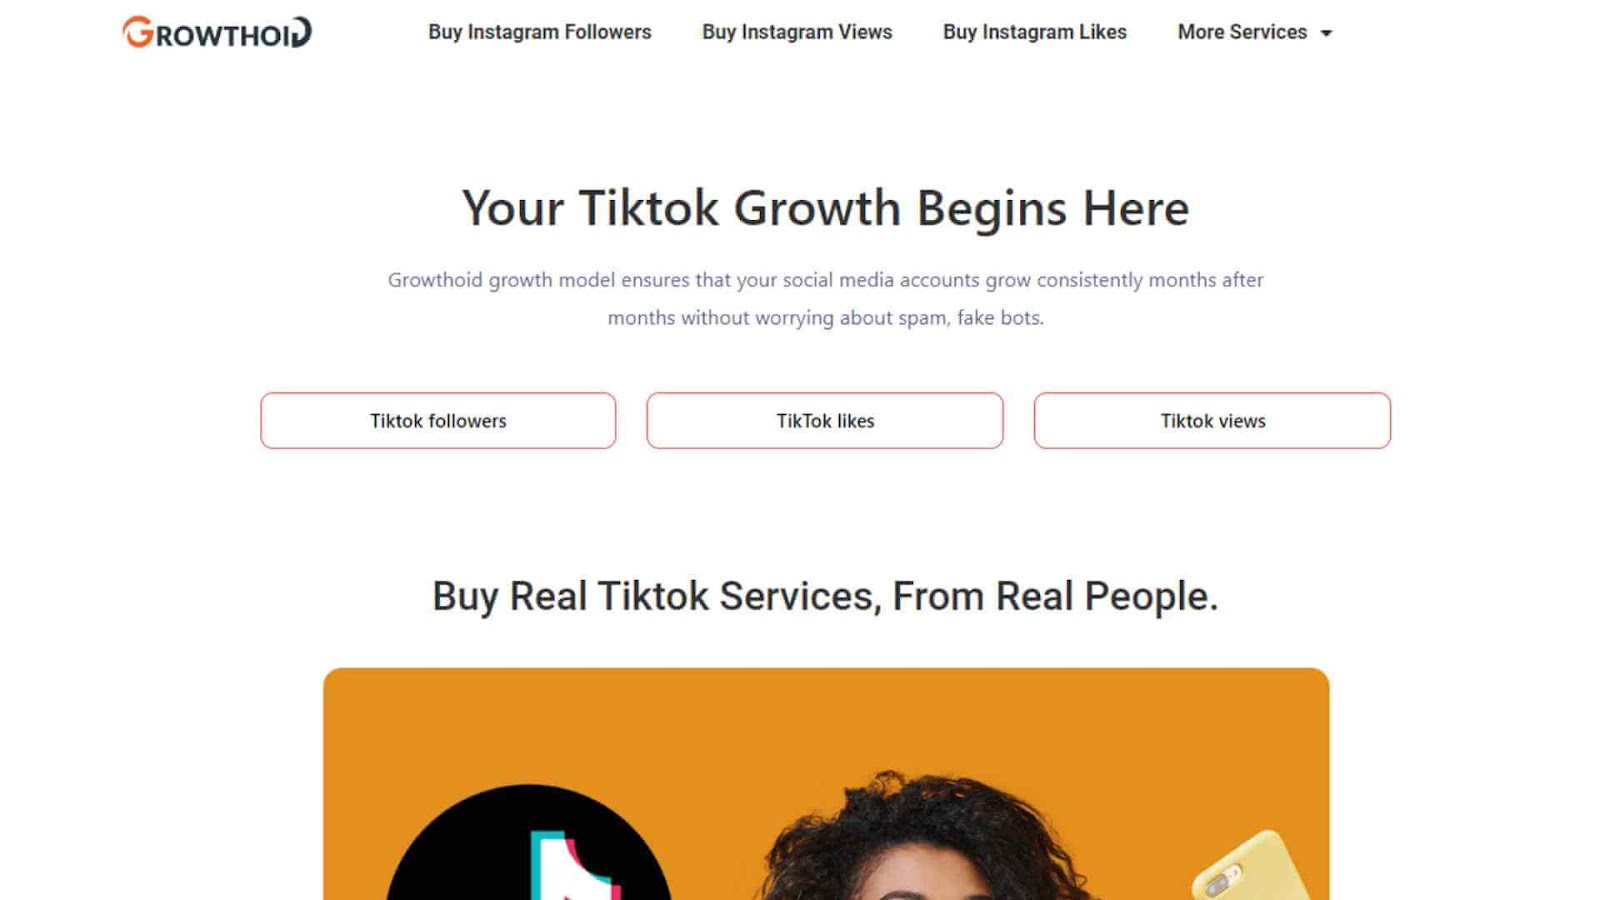 The homepage of Growthoid promoting TikTok growth services, highlighting real followers and engagement.